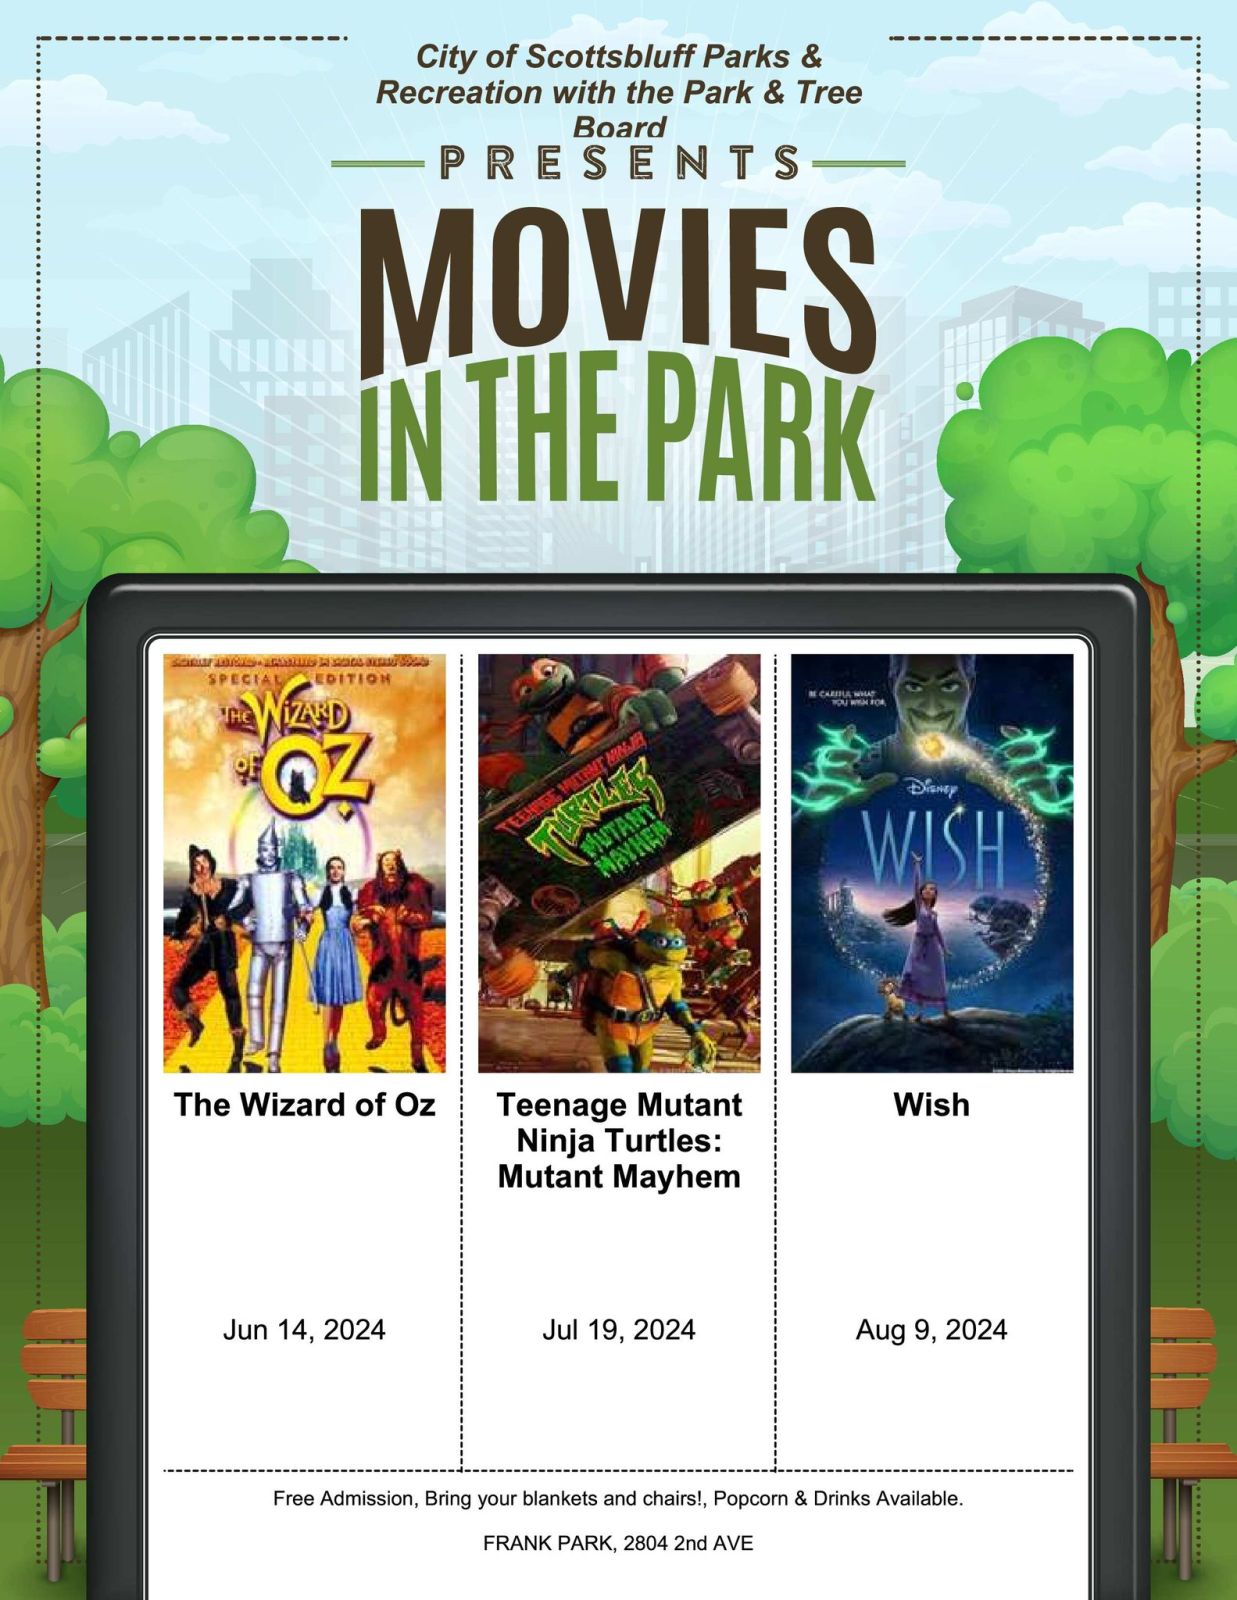 Event Promo Photo For Movies in the Park - The Wizard of Oz